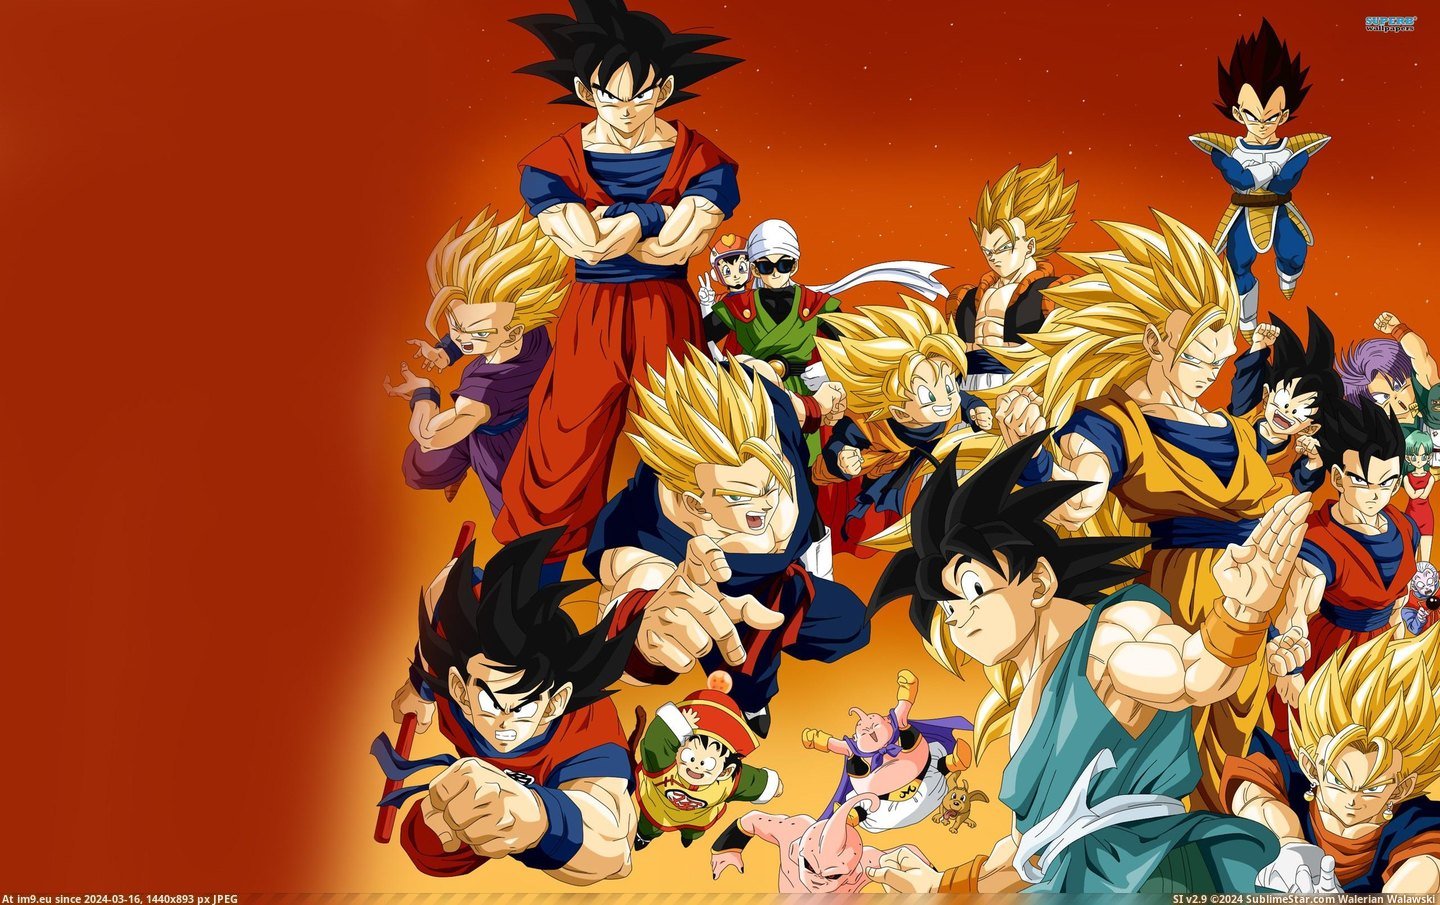 #Wallpapers  #Dragonball Dragonball Wallpapers 250 (HD) Pic. (Image of album HD Wallpapers - anime, games and abstract art/3D backgrounds))